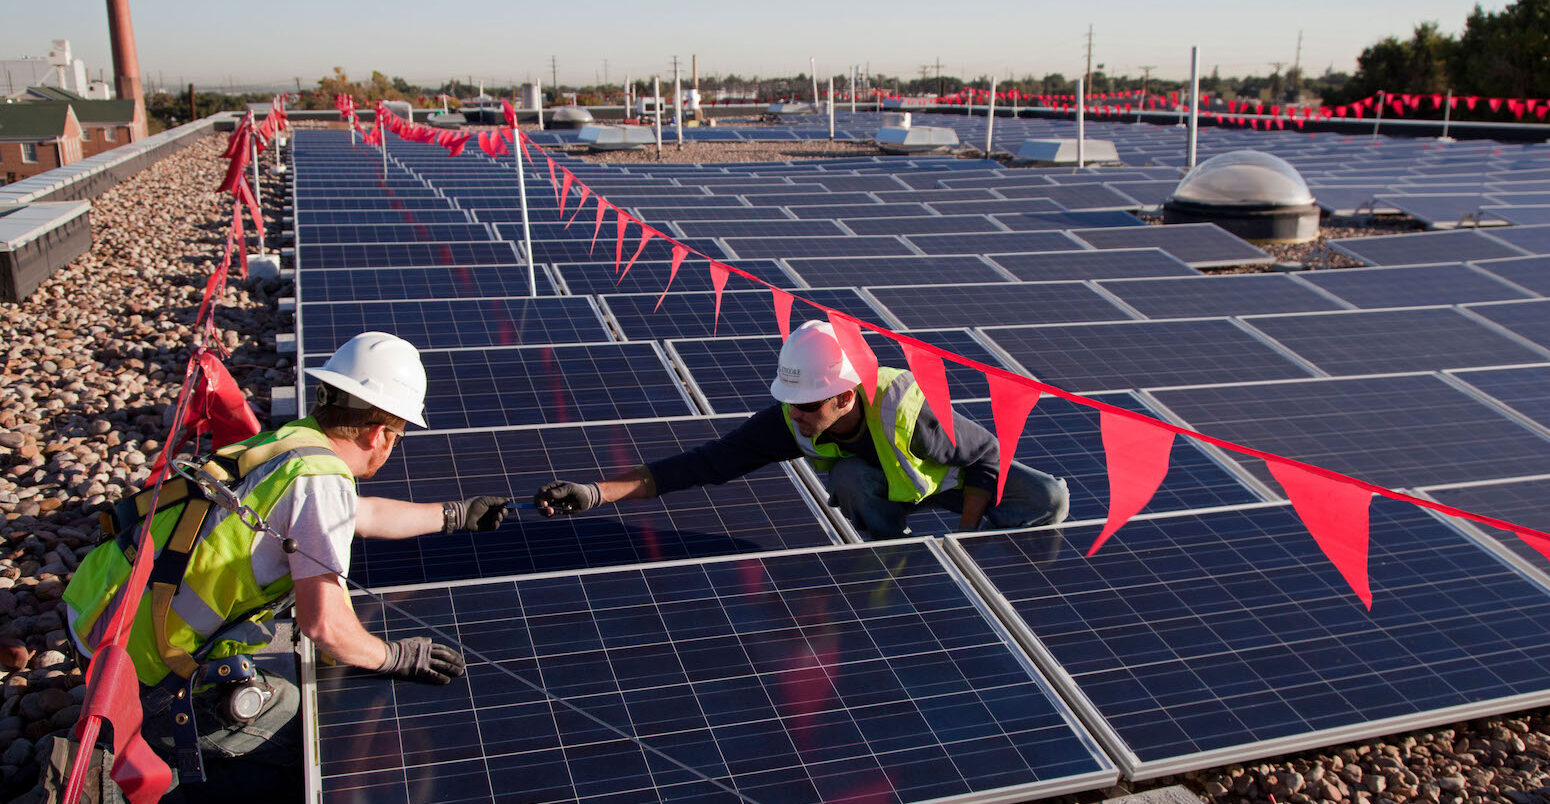 Workers install solar panels on the roof of an elementary school in Colorado.